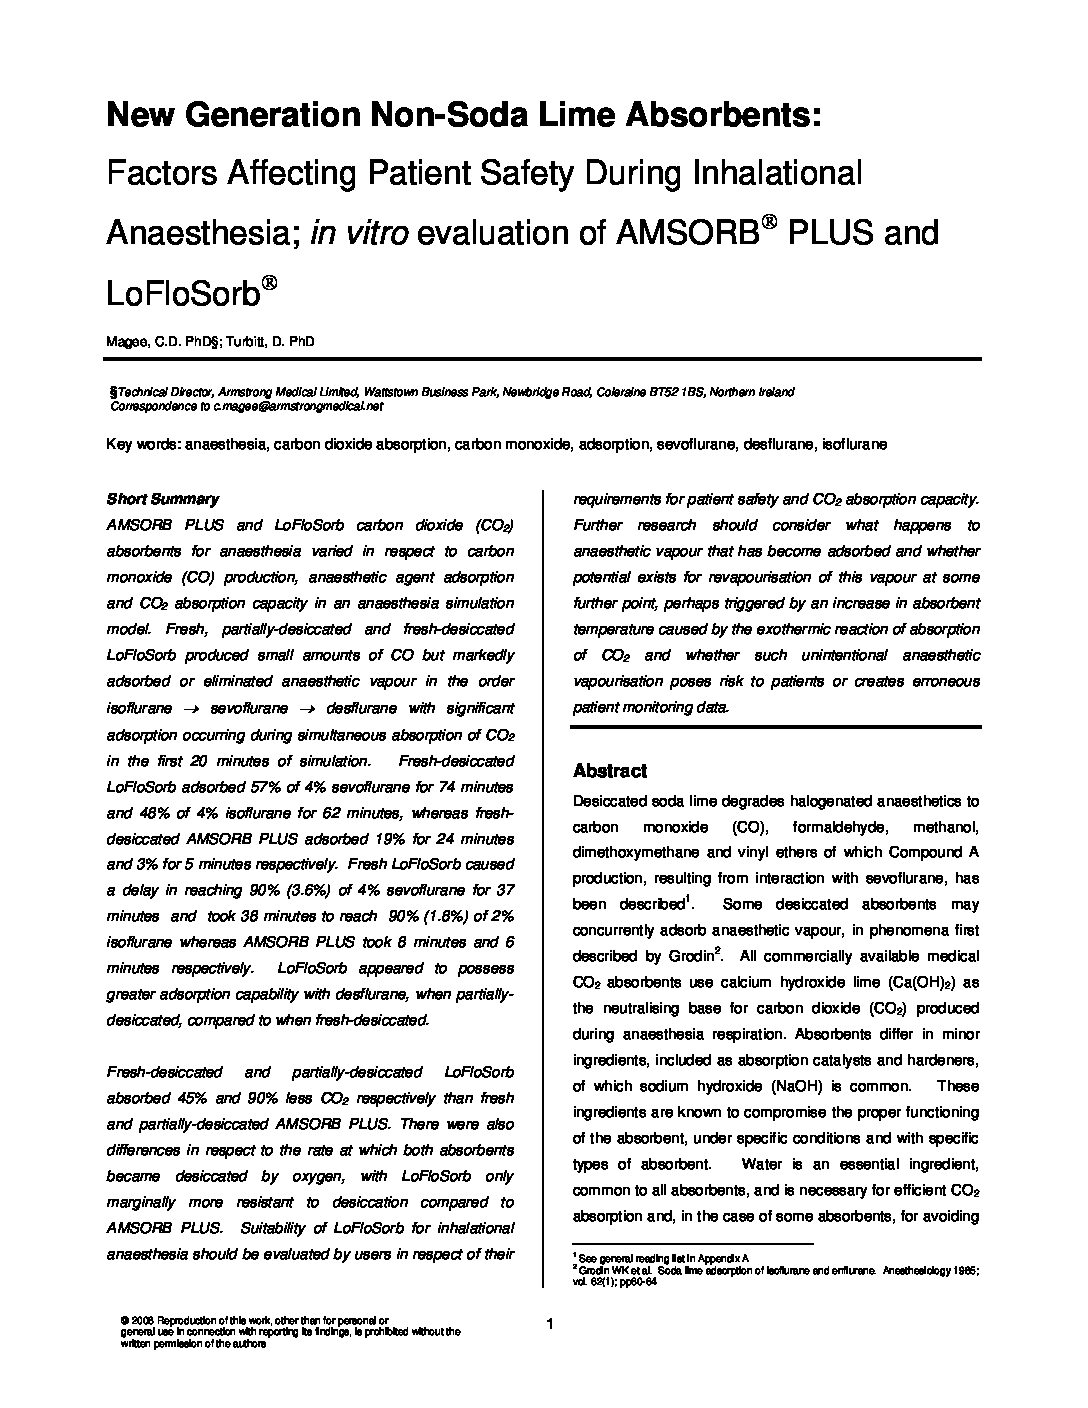 white papers amsorb pdf Armstrong Medical | Medical Device Manufacturer